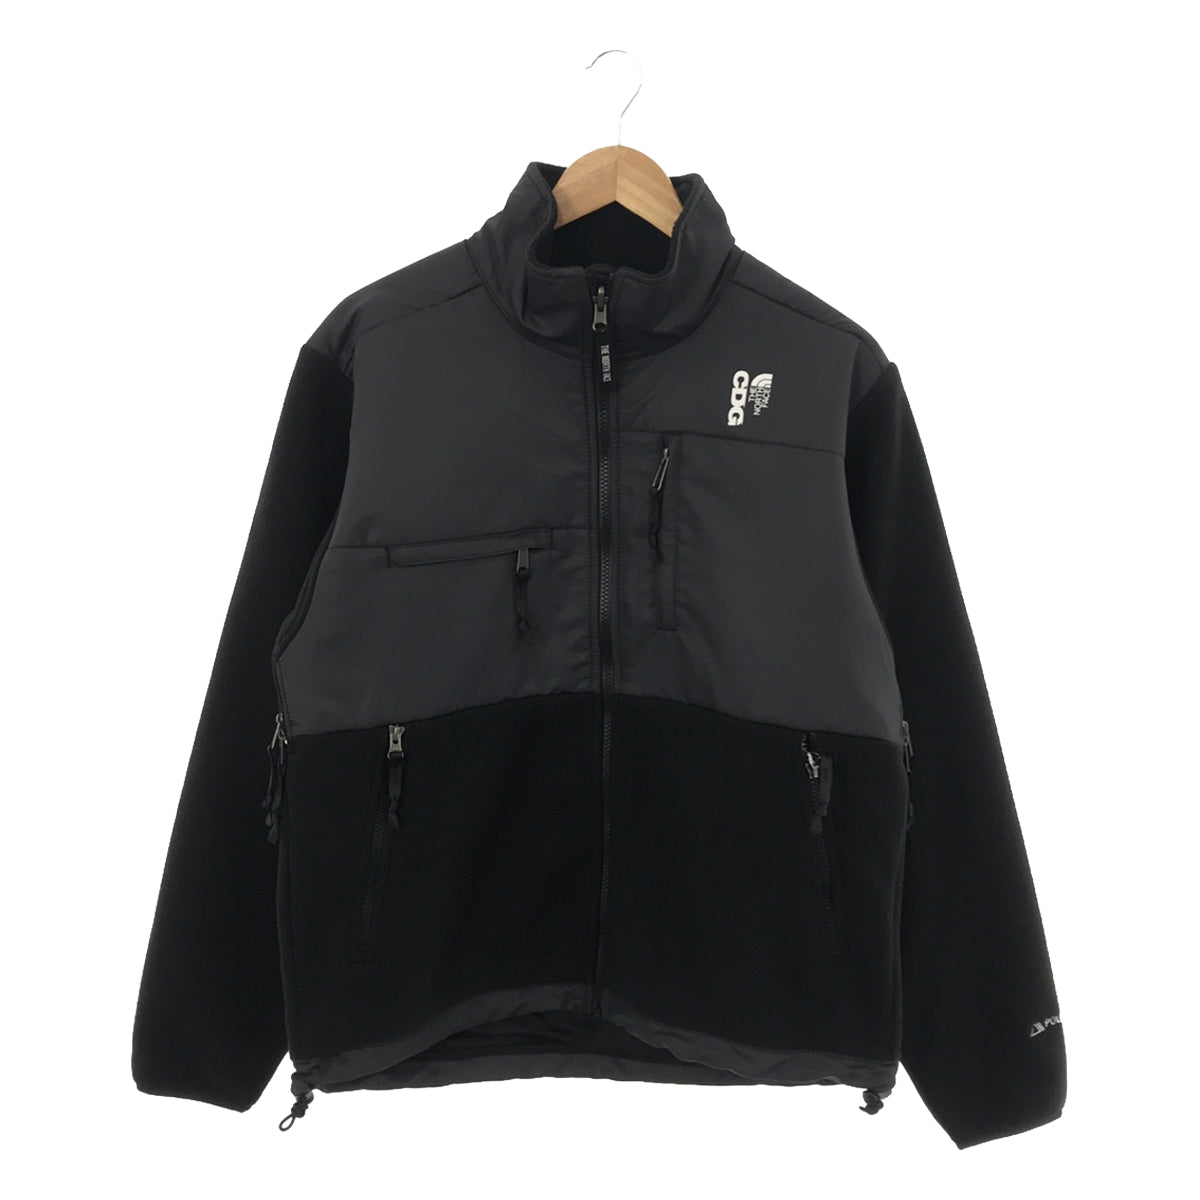 THE NORTH FACE / ザノースフェイス | × CDG COMME des GARCONS 